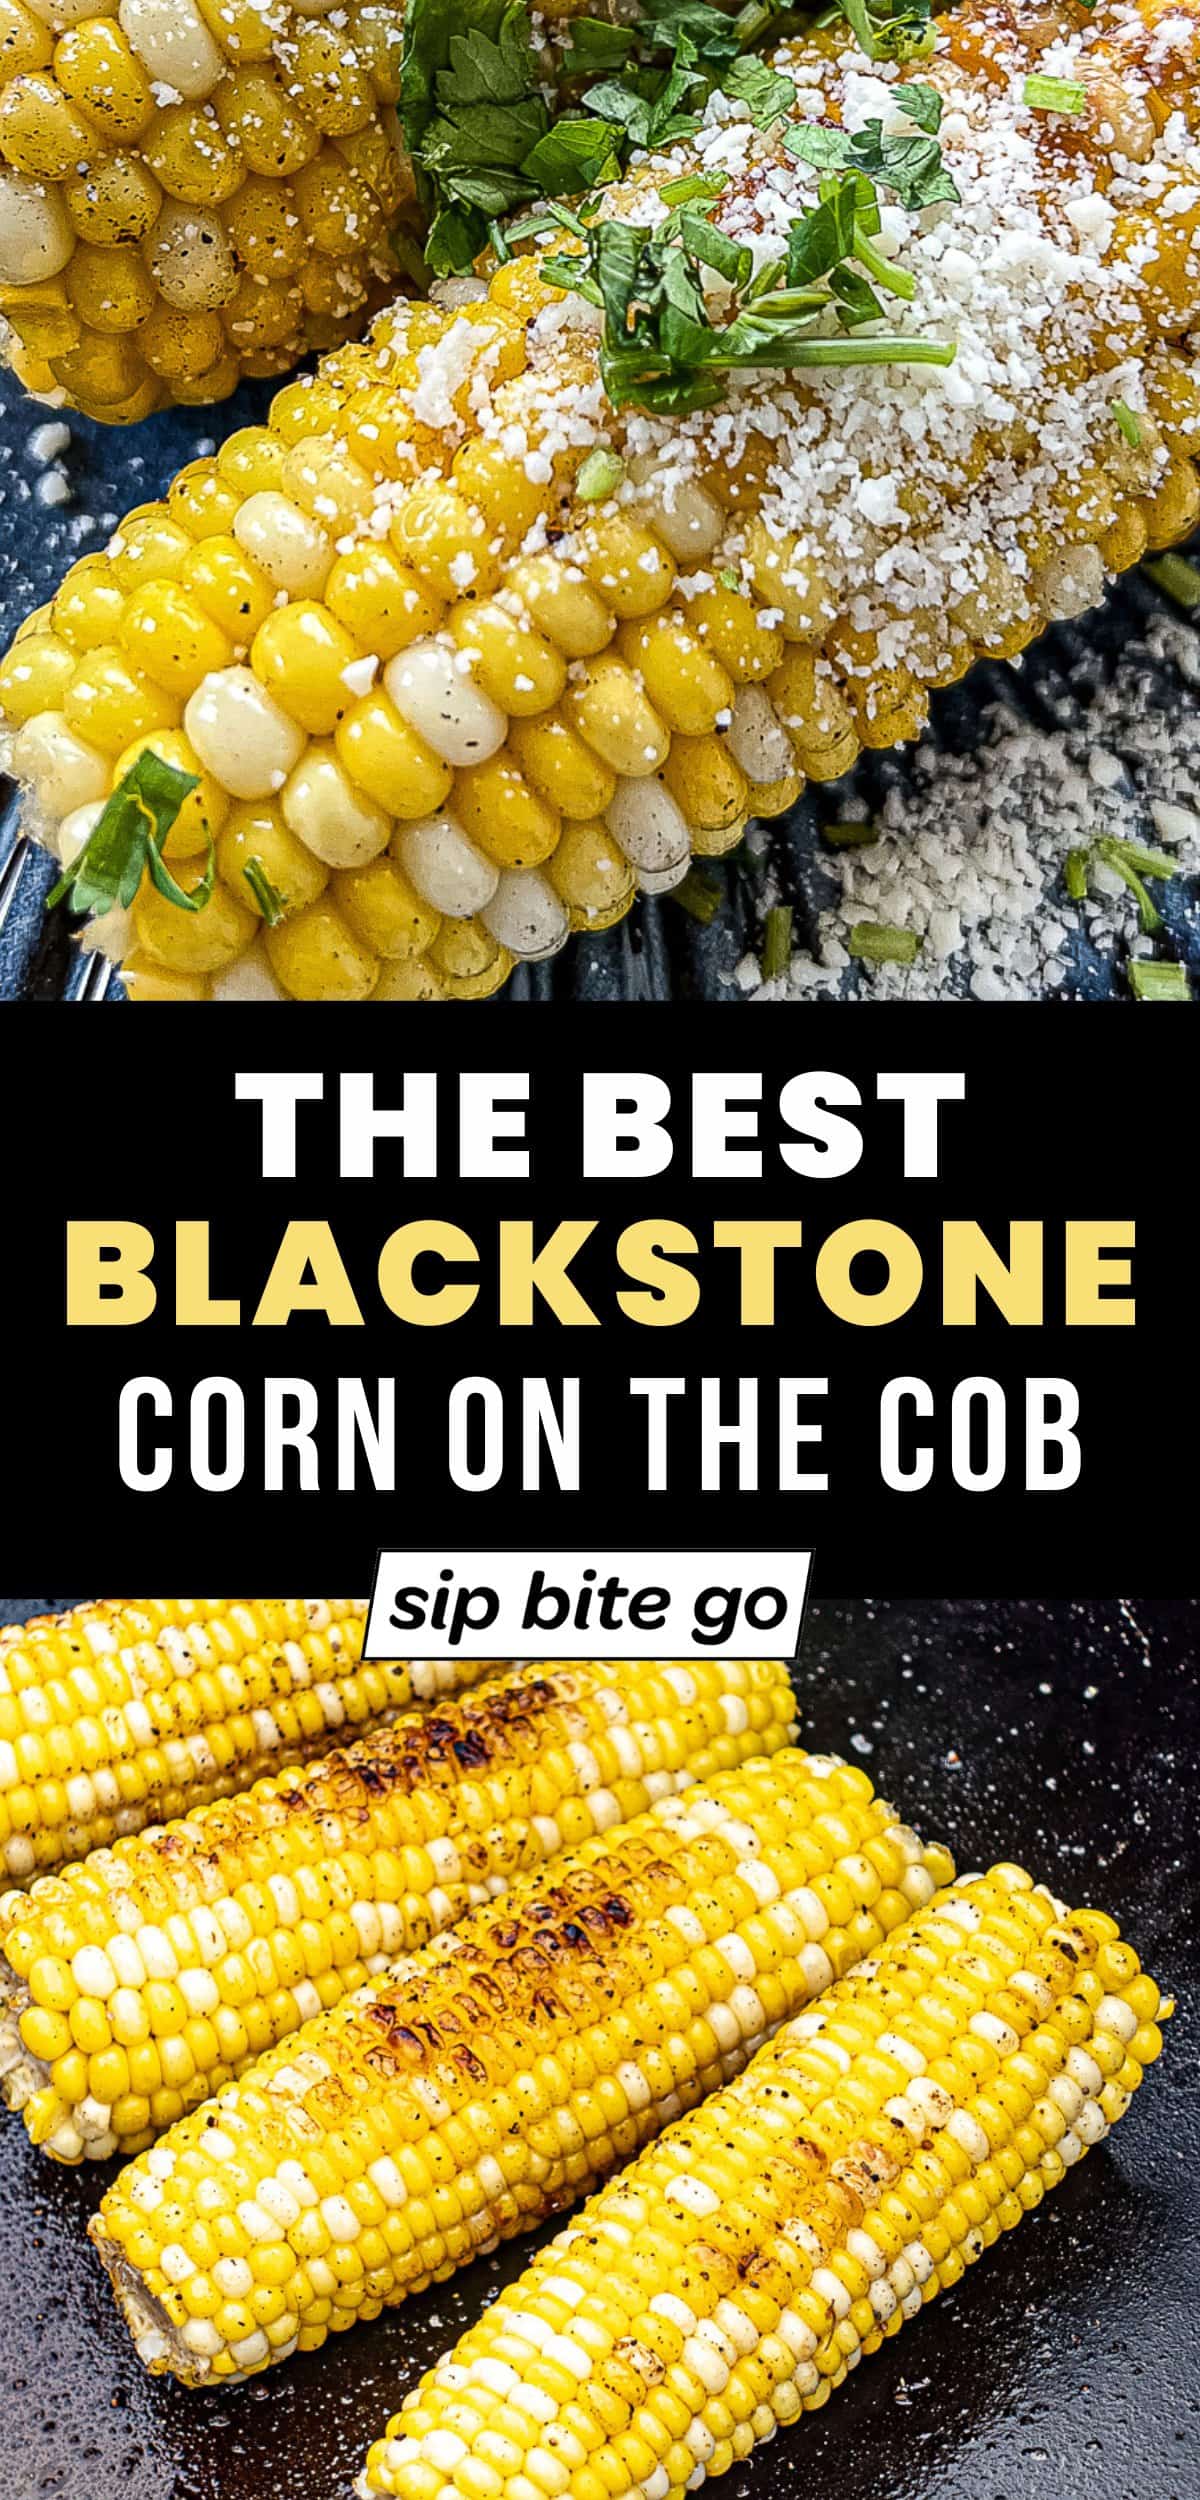 Recipe photos of Blackstone Corn On The Cob with Sip Bite Go logo and text overlay